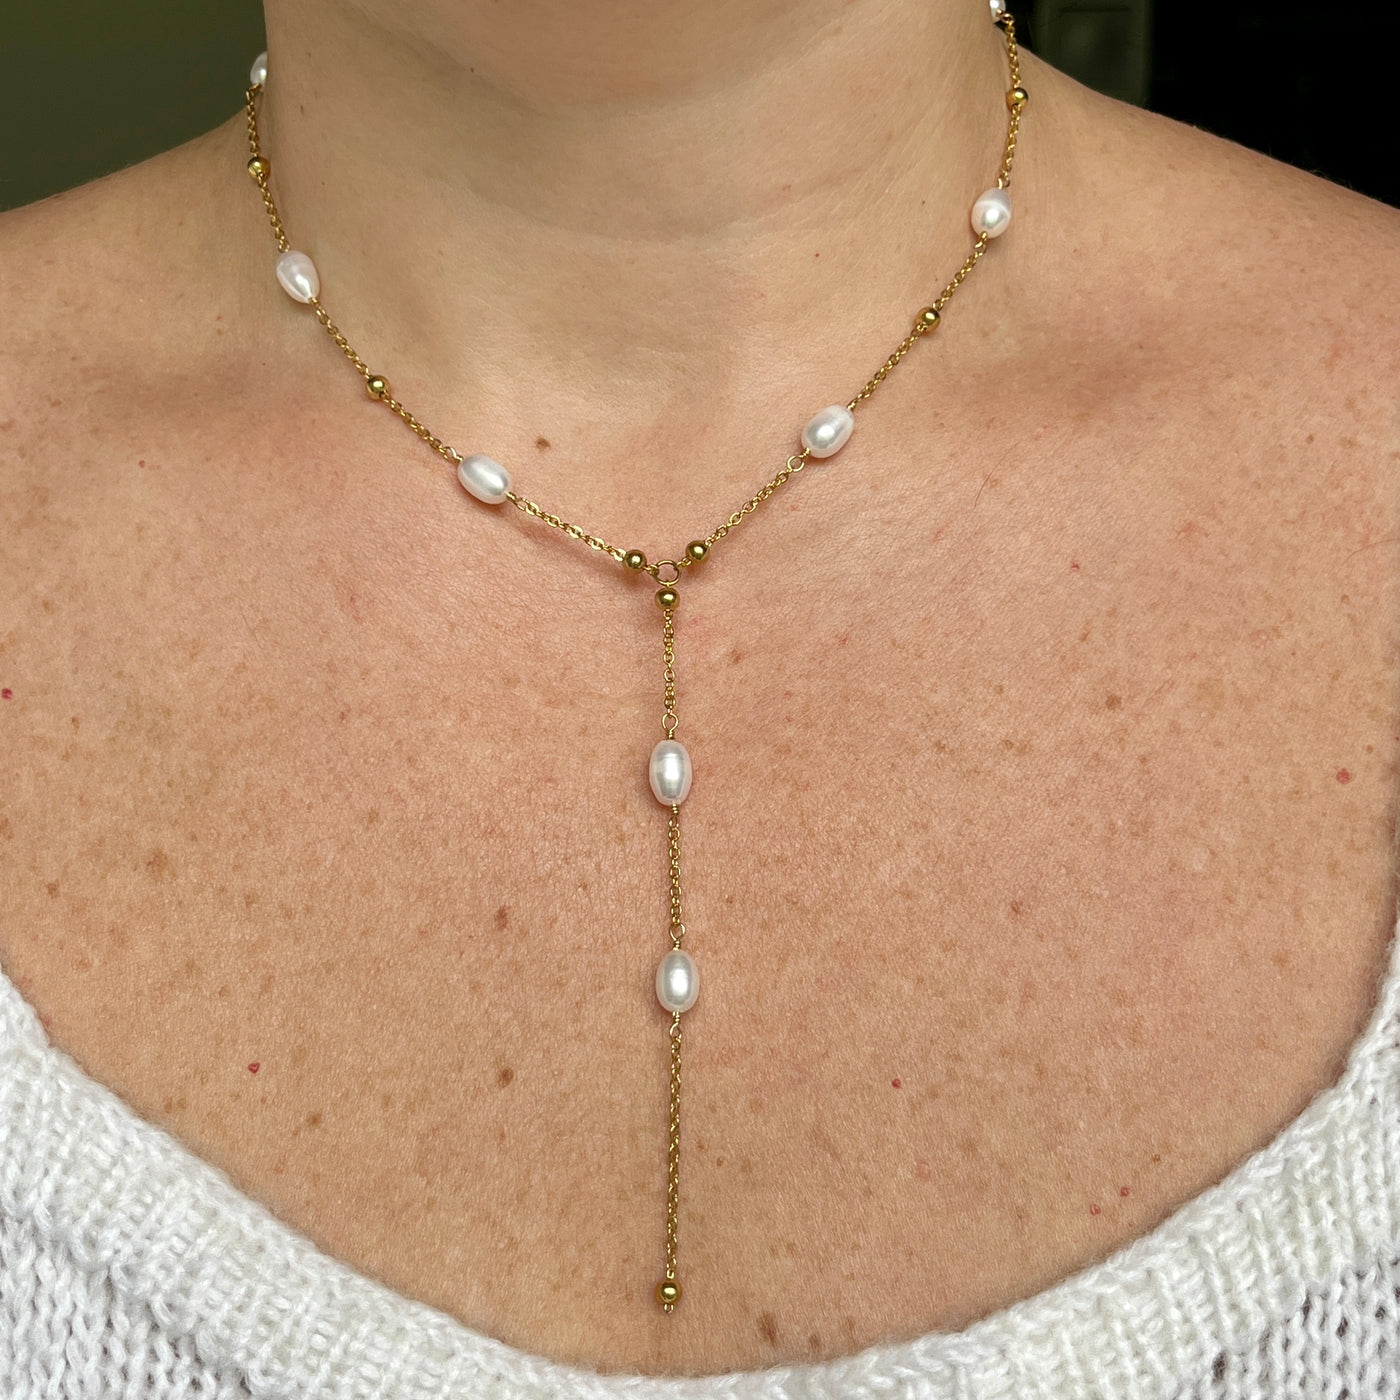 Delicate pearl necklace